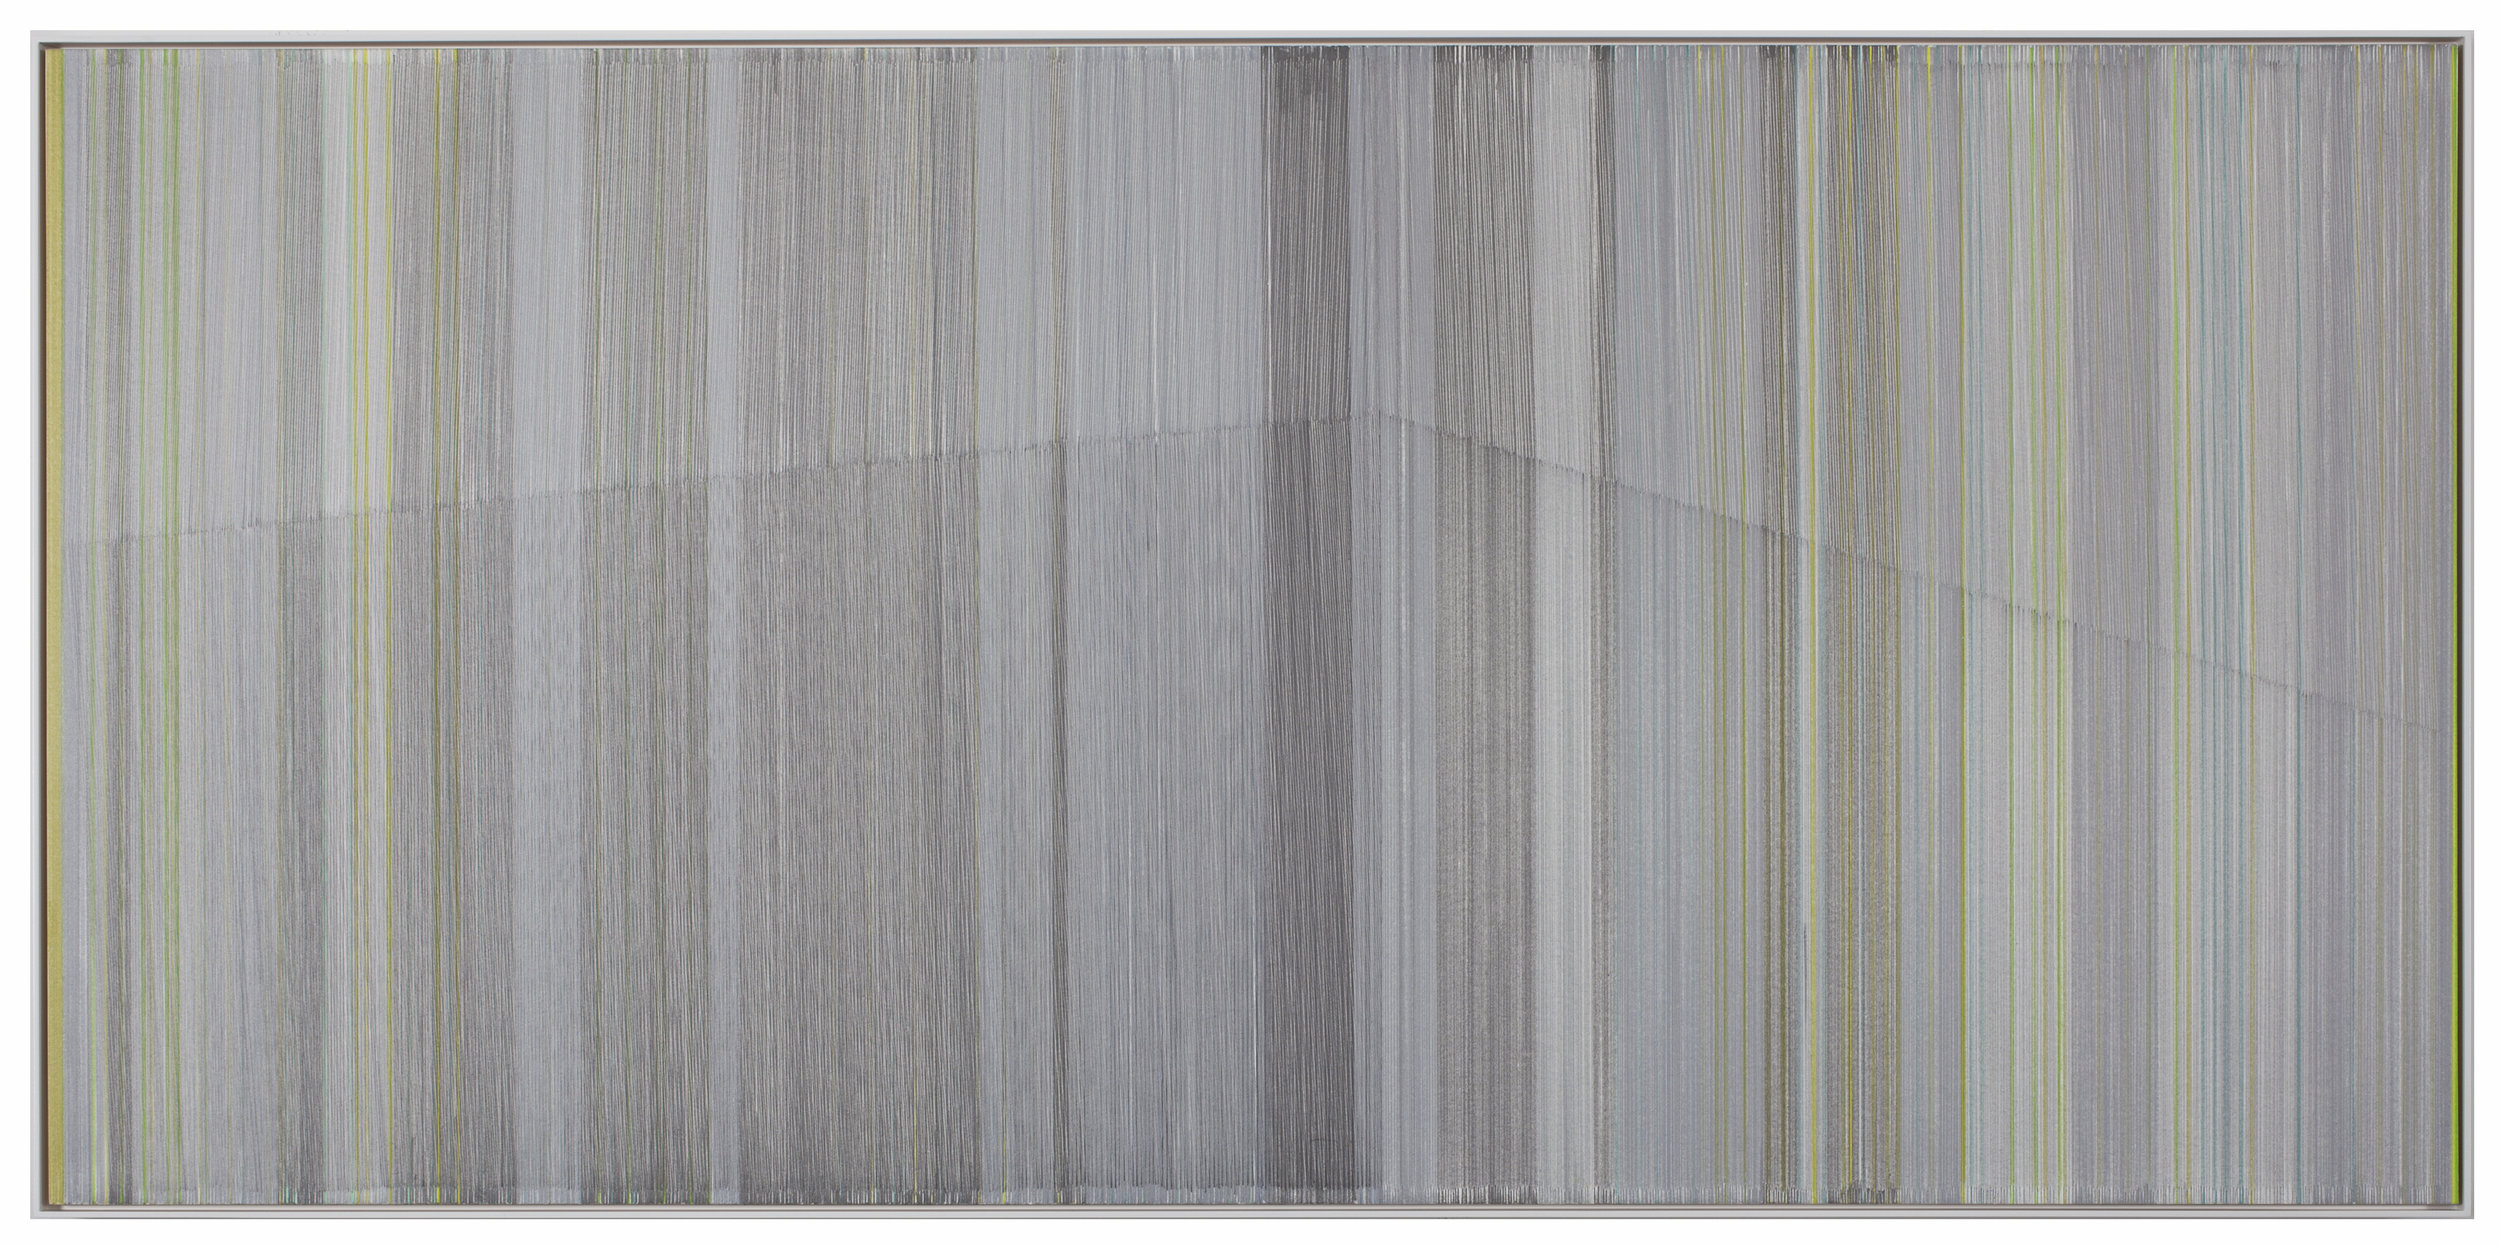    so quiet   2016 graphite and colored pencil on mat board 24 x 40 inches 